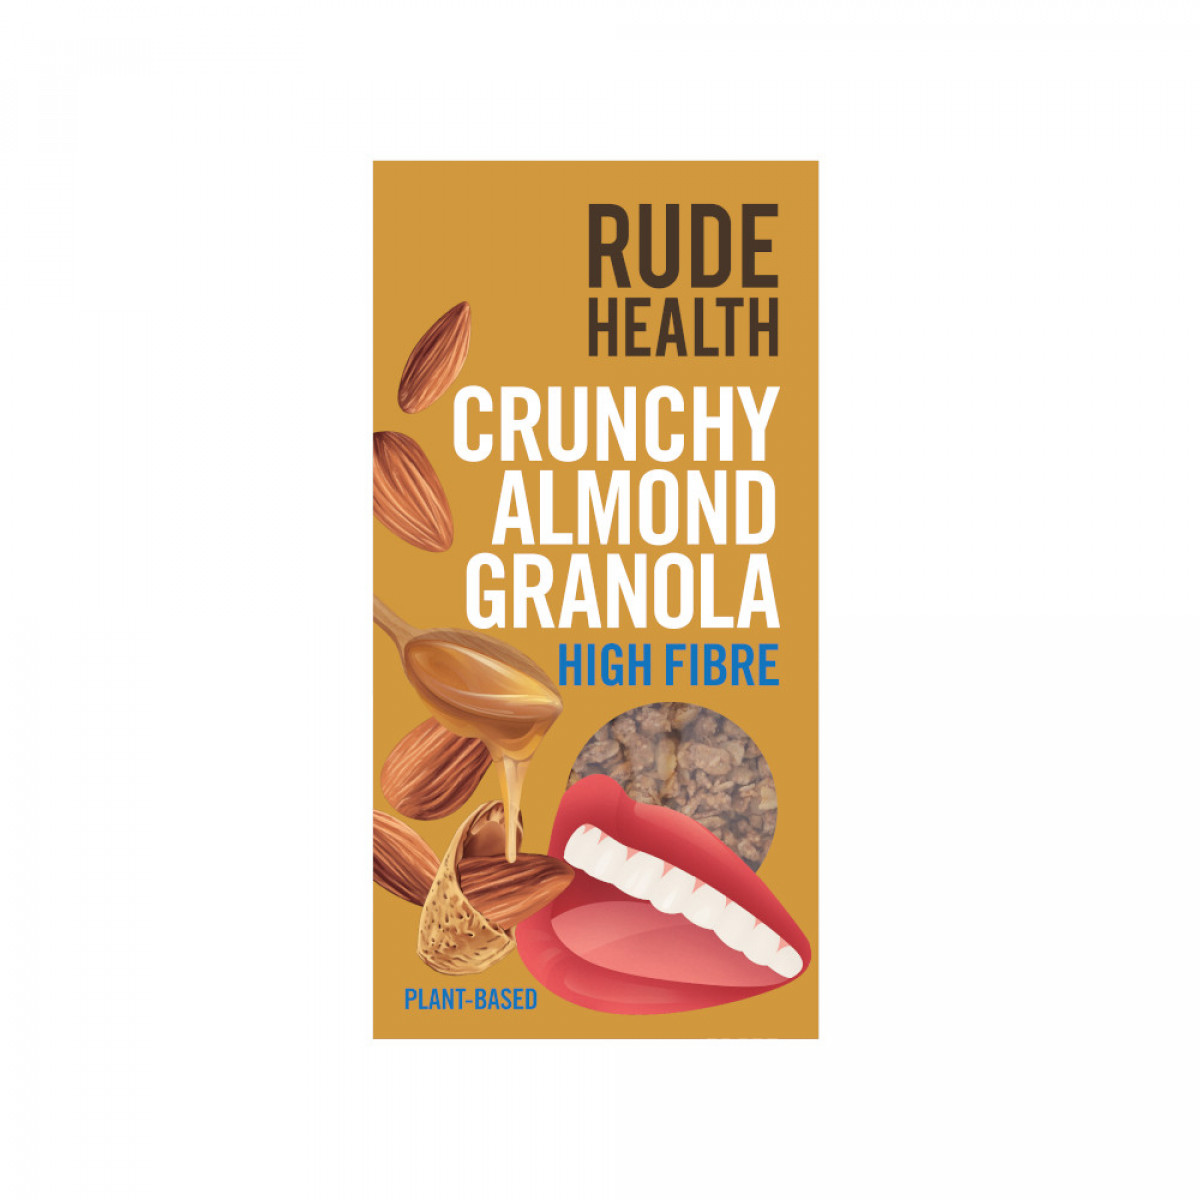 Product picture for Crunchy Almond Granola